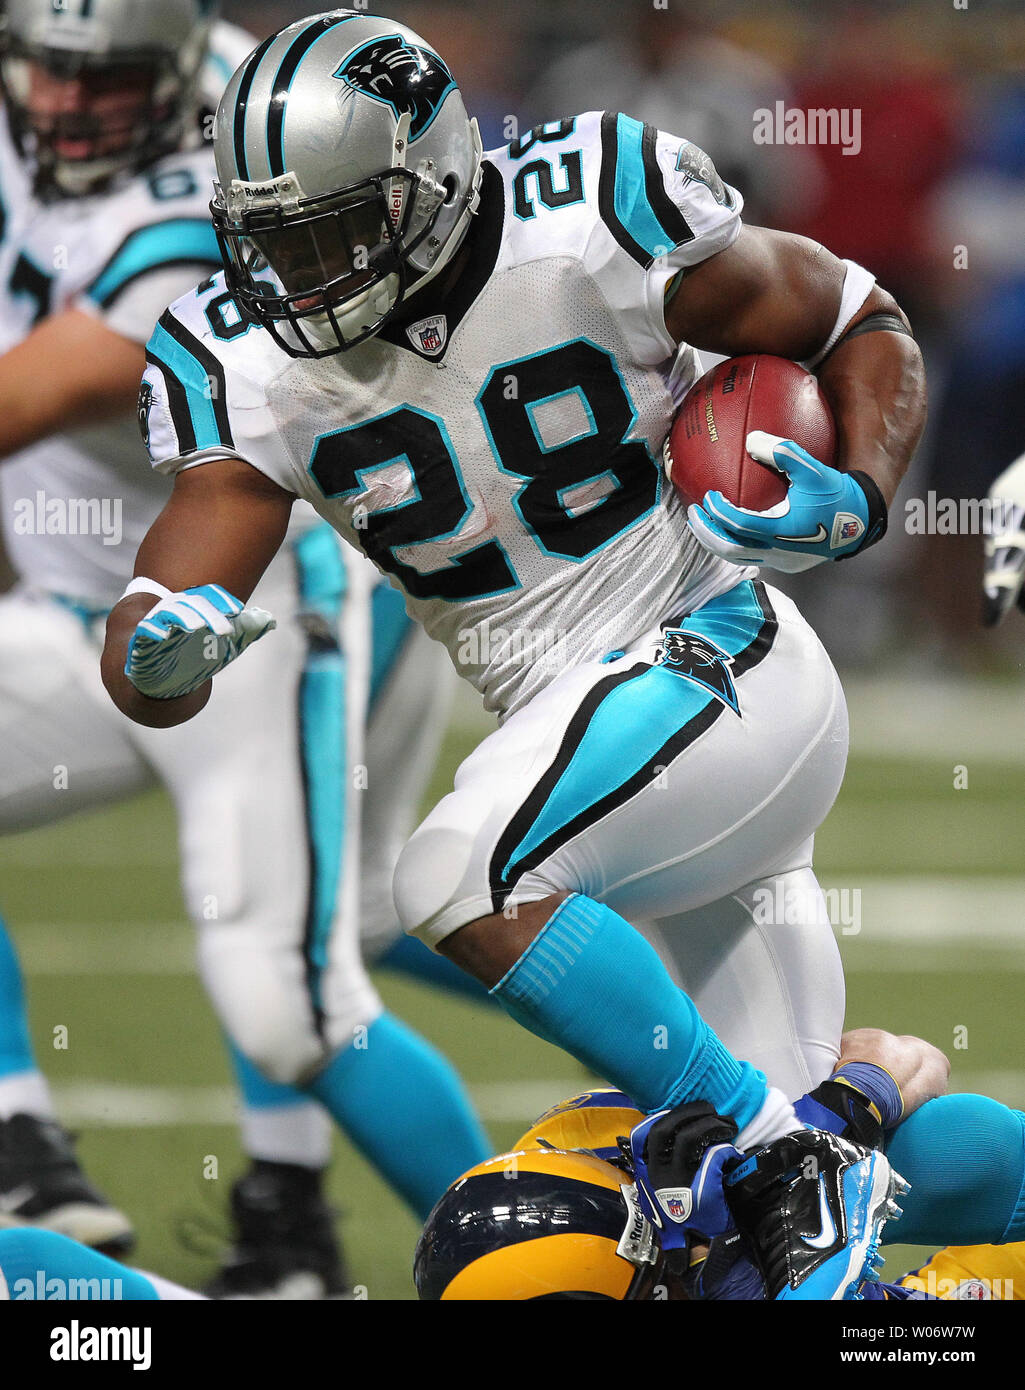 Carolina Panthers Jonathan Stewart  runs for little yardage in the second quarter against the St. Louis Rams at the Edward Jones Dome in St. Louis on October 31, 2010.  St. Louis defeated Carolina, 20-10. UPI/Bill Greenblatt Stock Photo